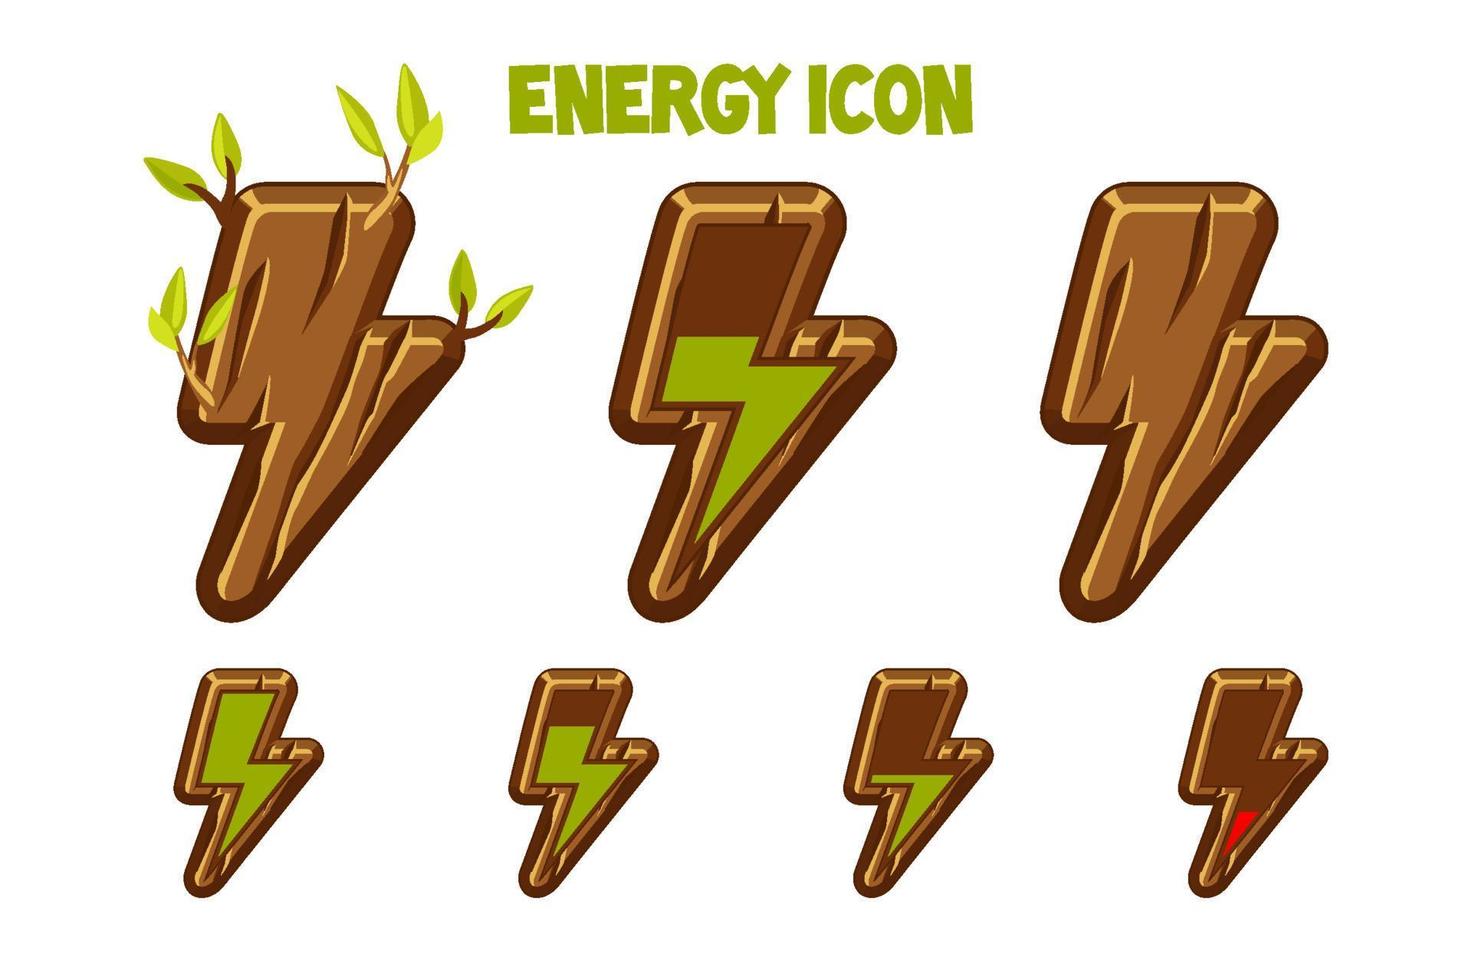 Wooden icons of lightning energy, discharge steps. Seth wooden isolated lightning with leaves. vector